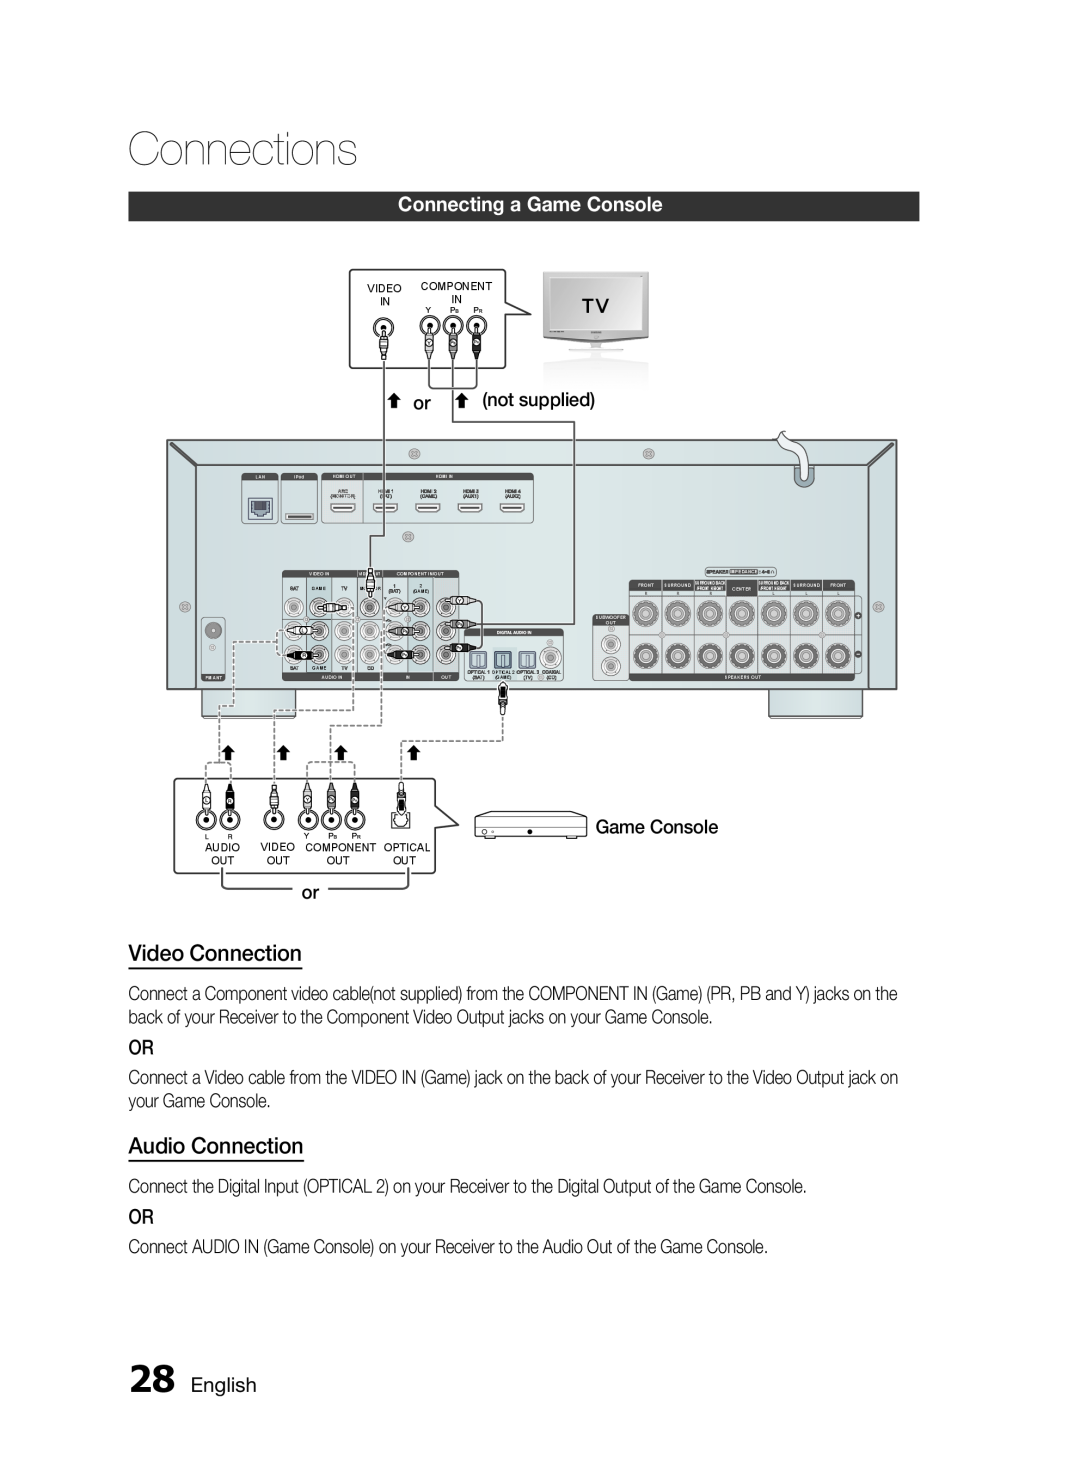 Samsung HW-D7000 user manual Connecting a Game Console, Connections, Video Connection, Audio Connection, English 